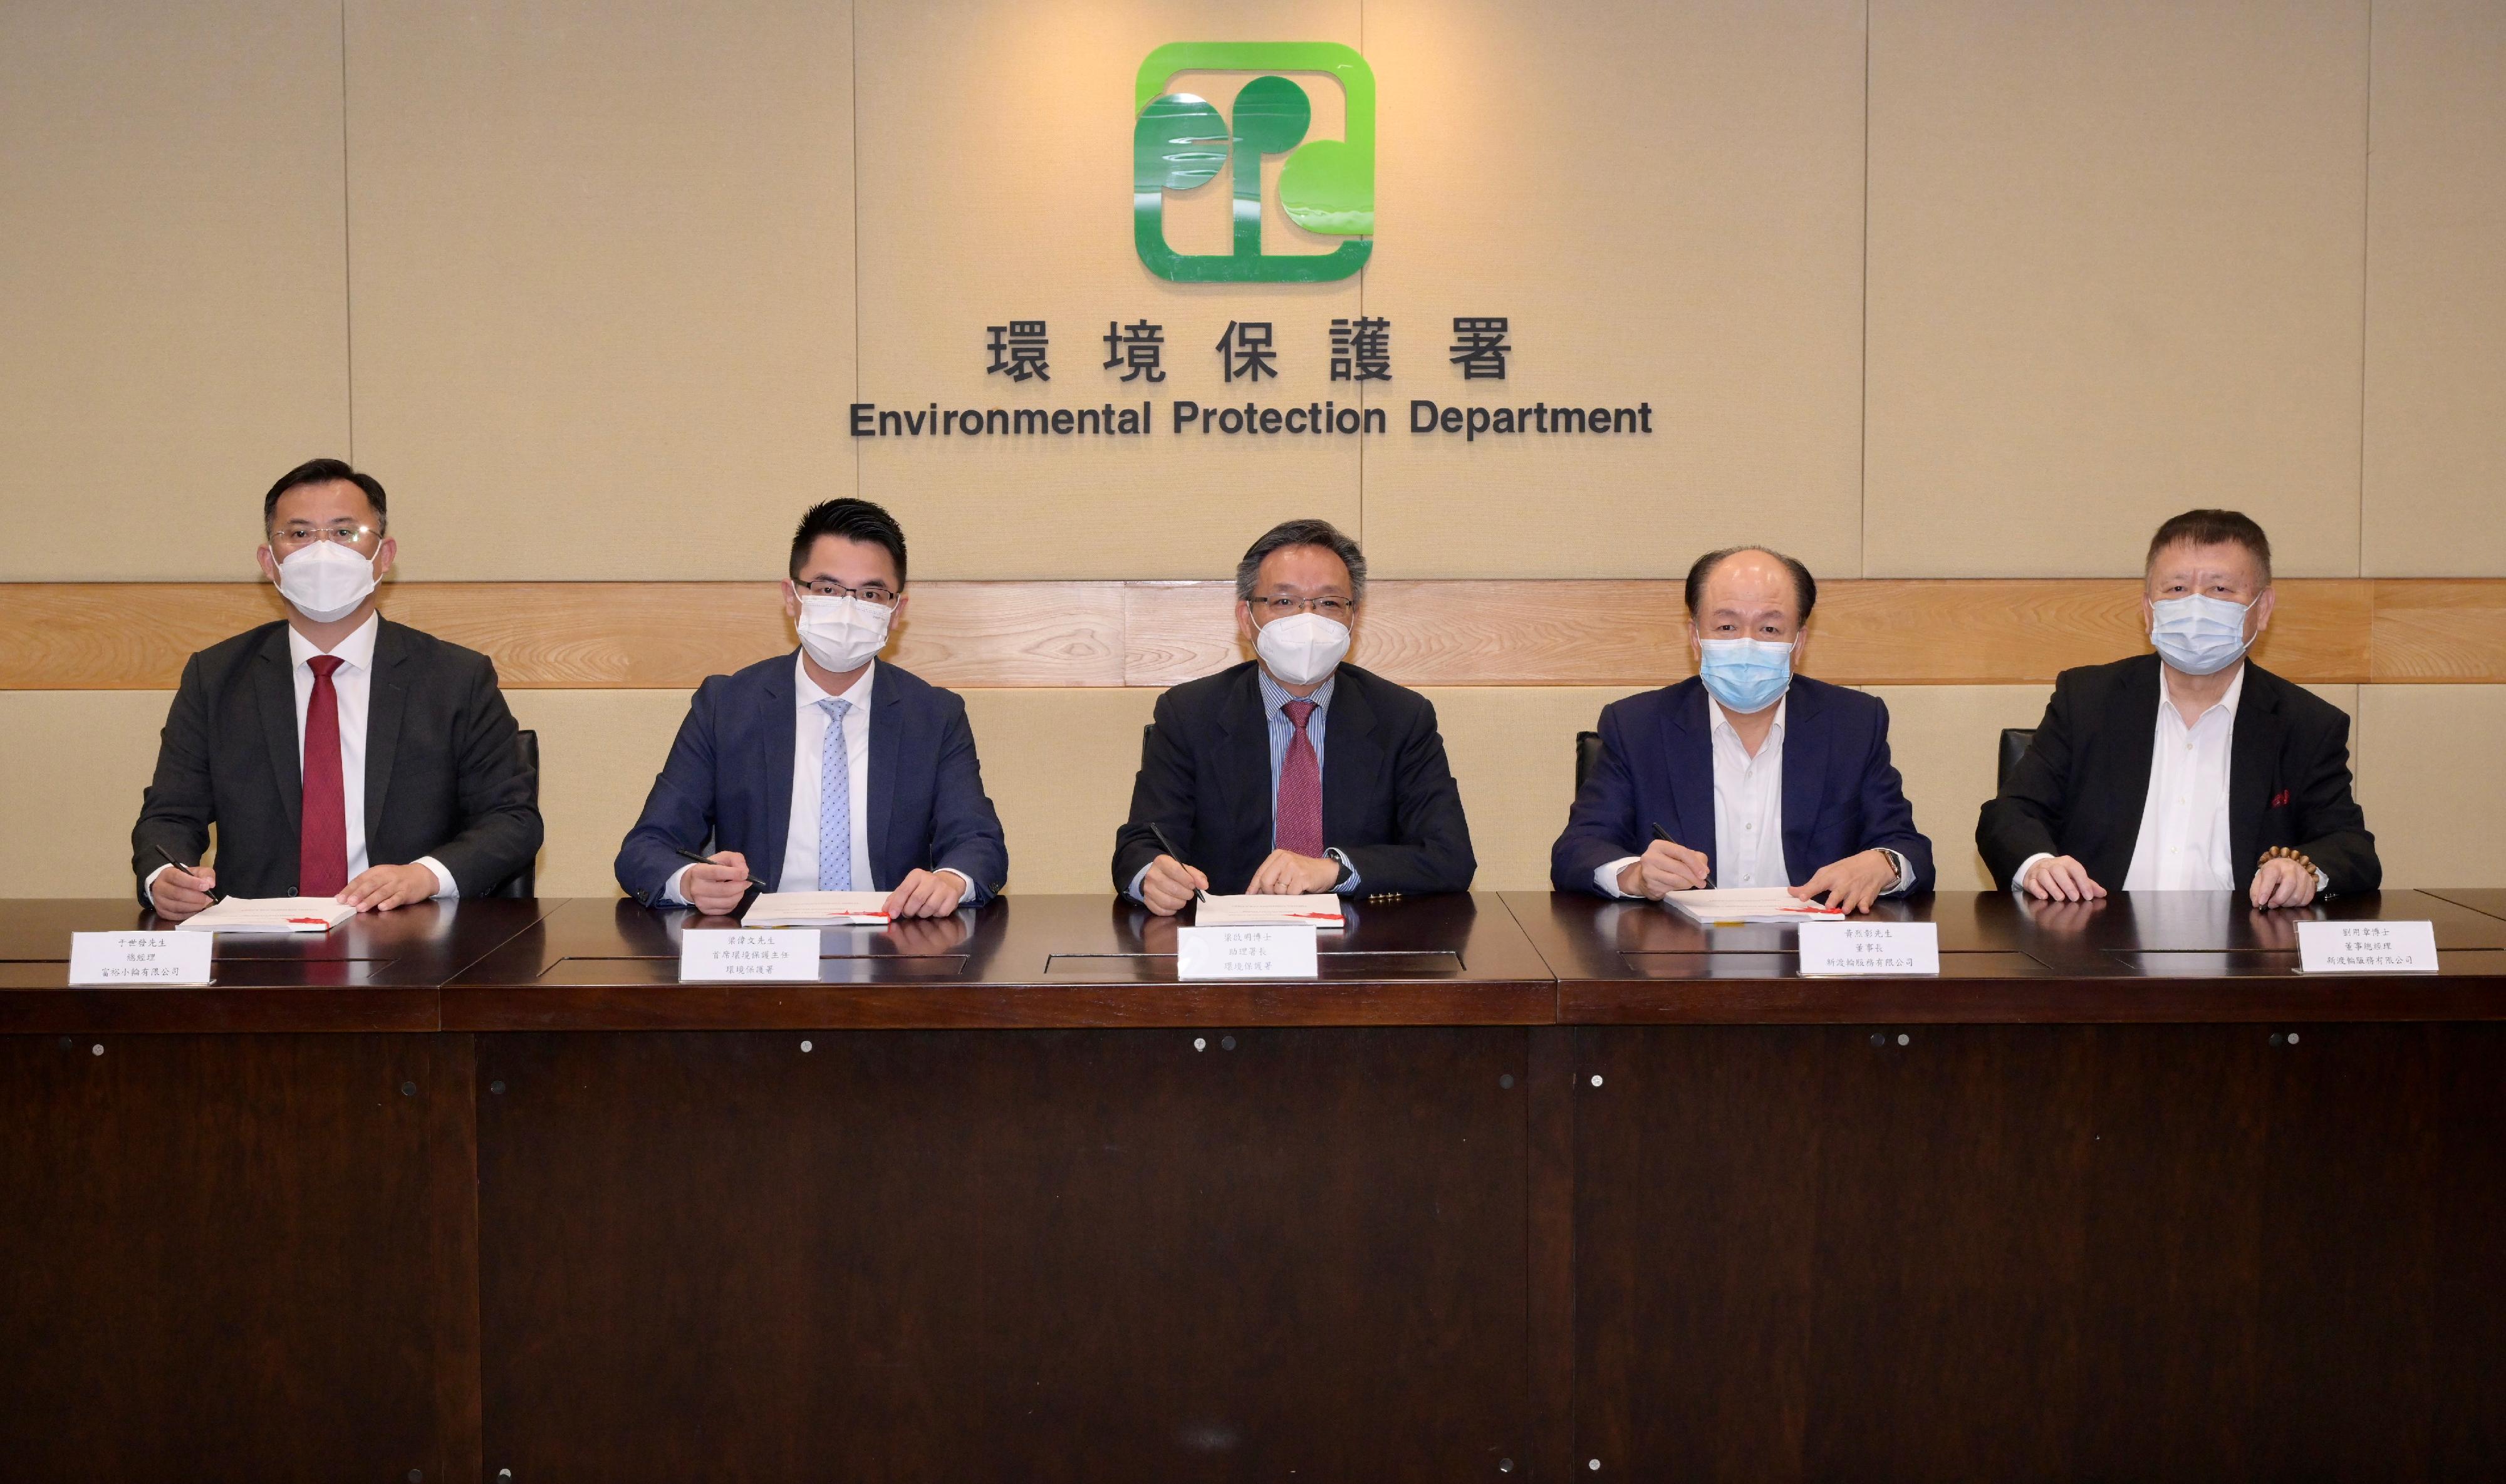 The Environmental Protection Department signs subsidy agreements for the Pilot Scheme for Electric Ferries with the Sun Ferry Services Company Limited and the Fortune Ferry Company Limited today (November 29). Picture shows the Assistant Director of Environmental Protection, Dr Kenneth Leung (centre), the Principal Environmental Protection Officer, Mr Ray Leung (second left), and representatives of the two ferry operators.